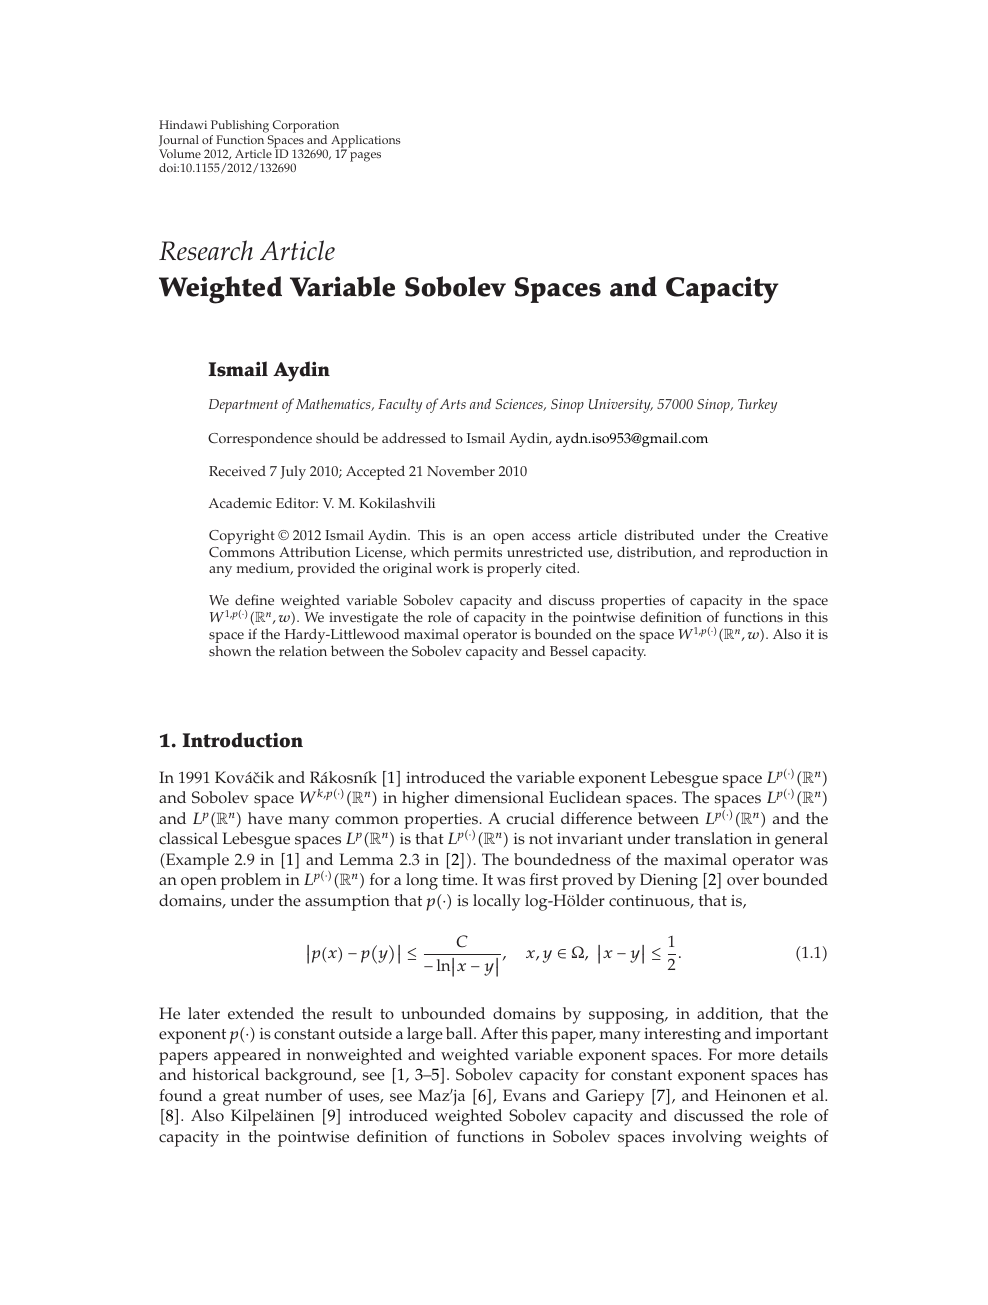 Weighted Variable Sobolev Spaces And Capacity Topic Of Research Paper In Mathematics Download Scholarly Article Pdf And Read For Free On Cyberleninka Open Science Hub